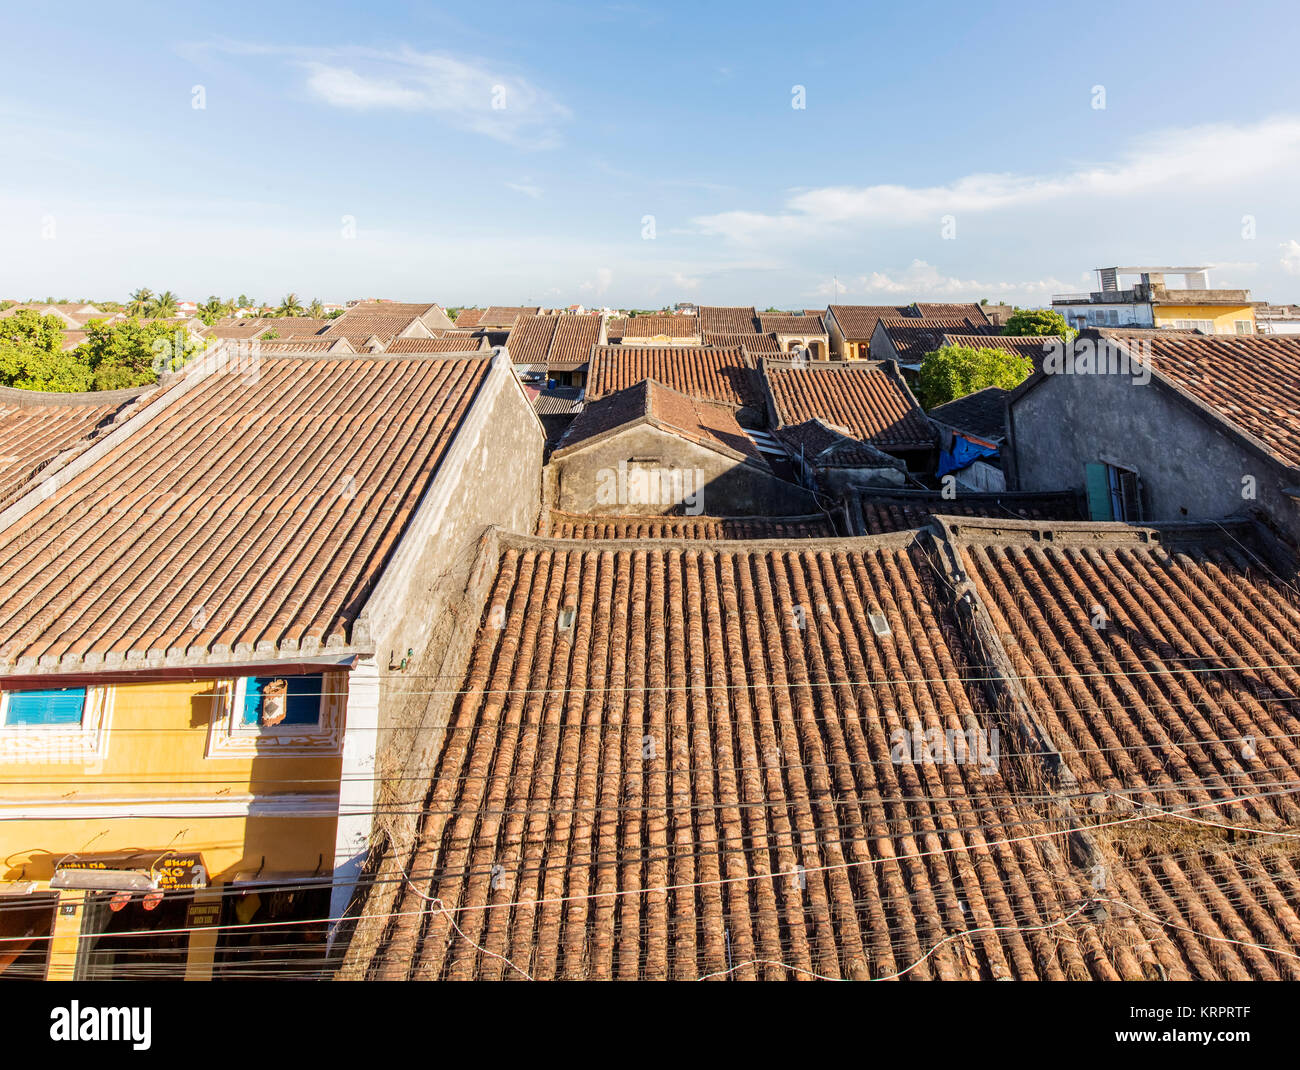 Royalty high quality free stock image of Hoi An, Vietnam. Stock Photo